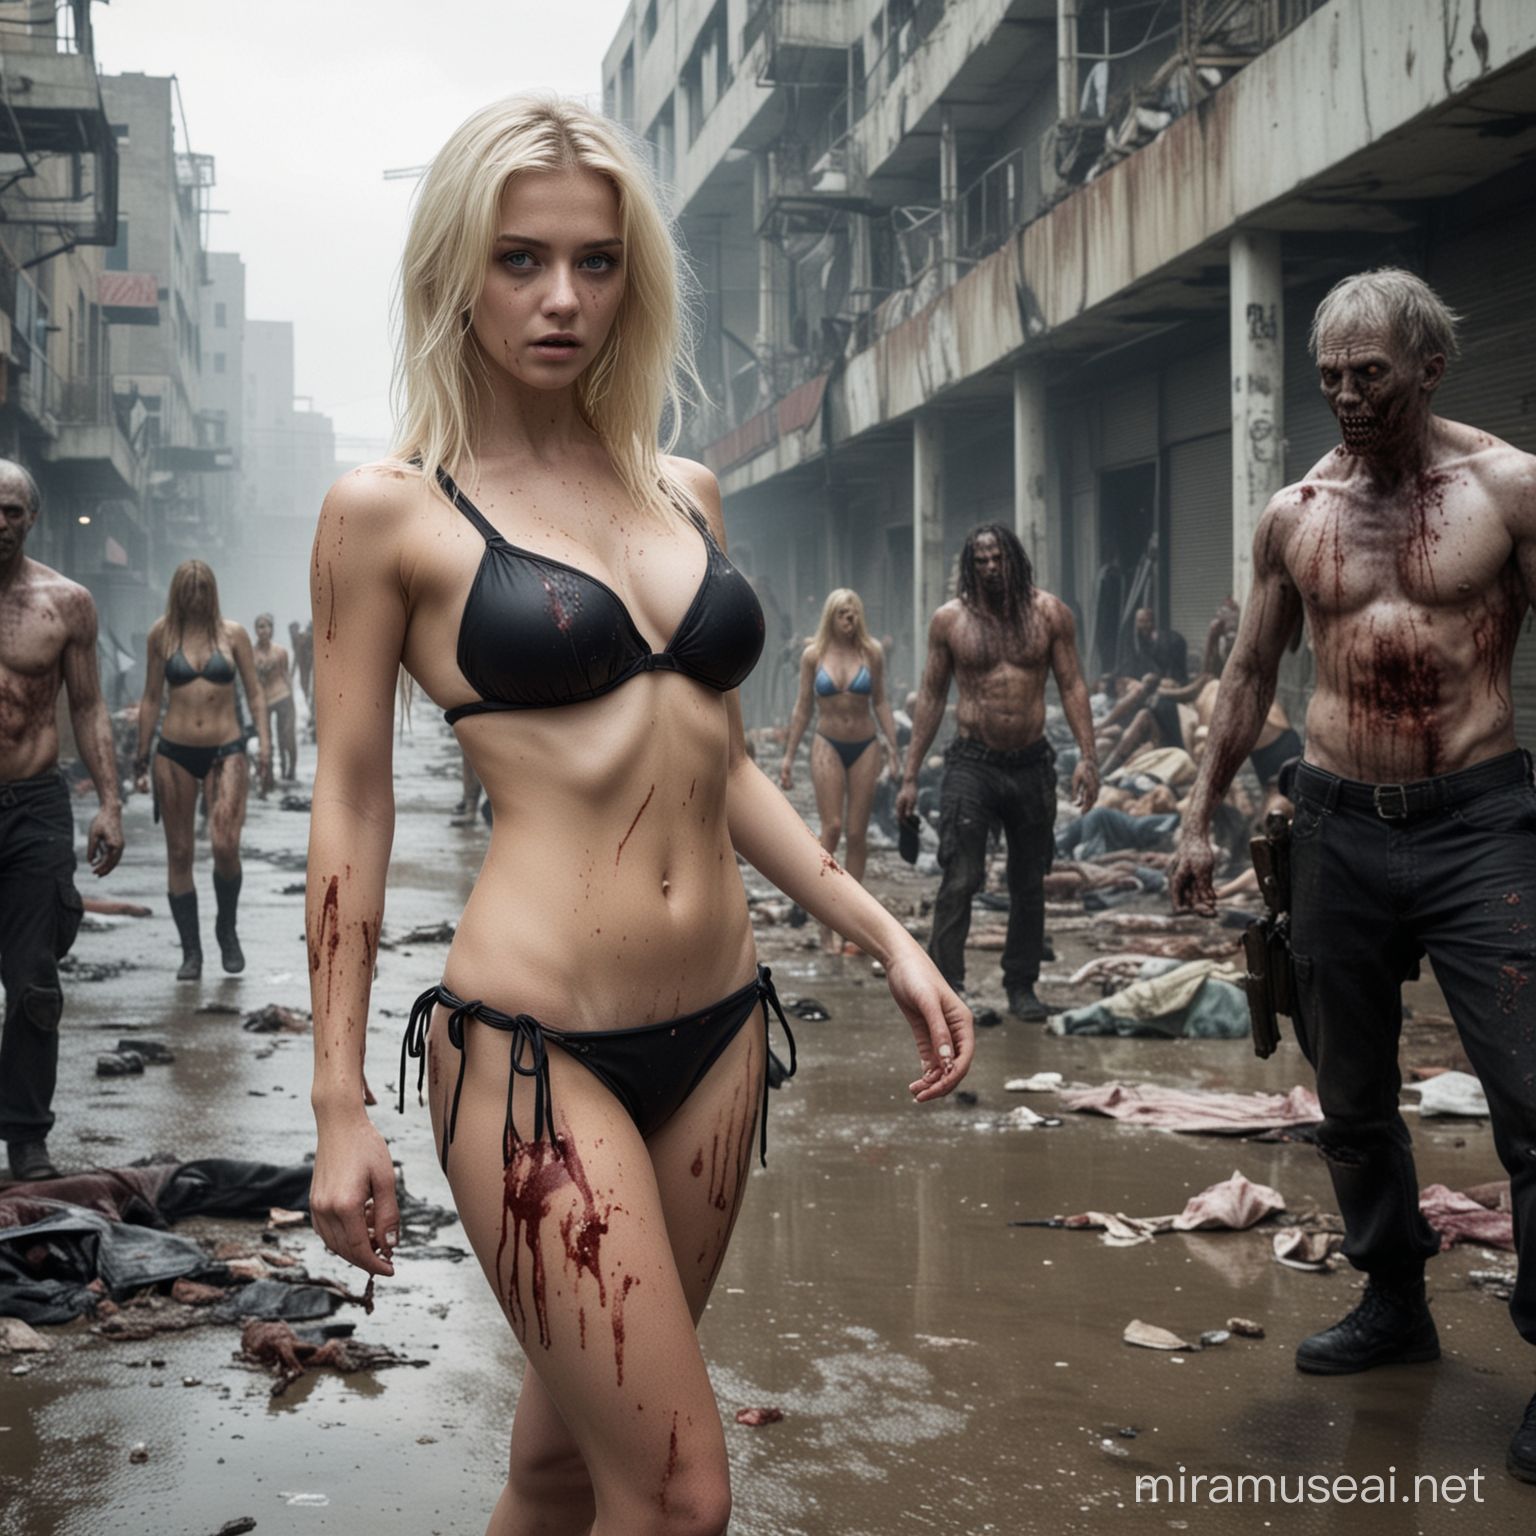 18 year old blonde girl, wearing bikini in a apocalyptic city, surrounded by zombies, wound